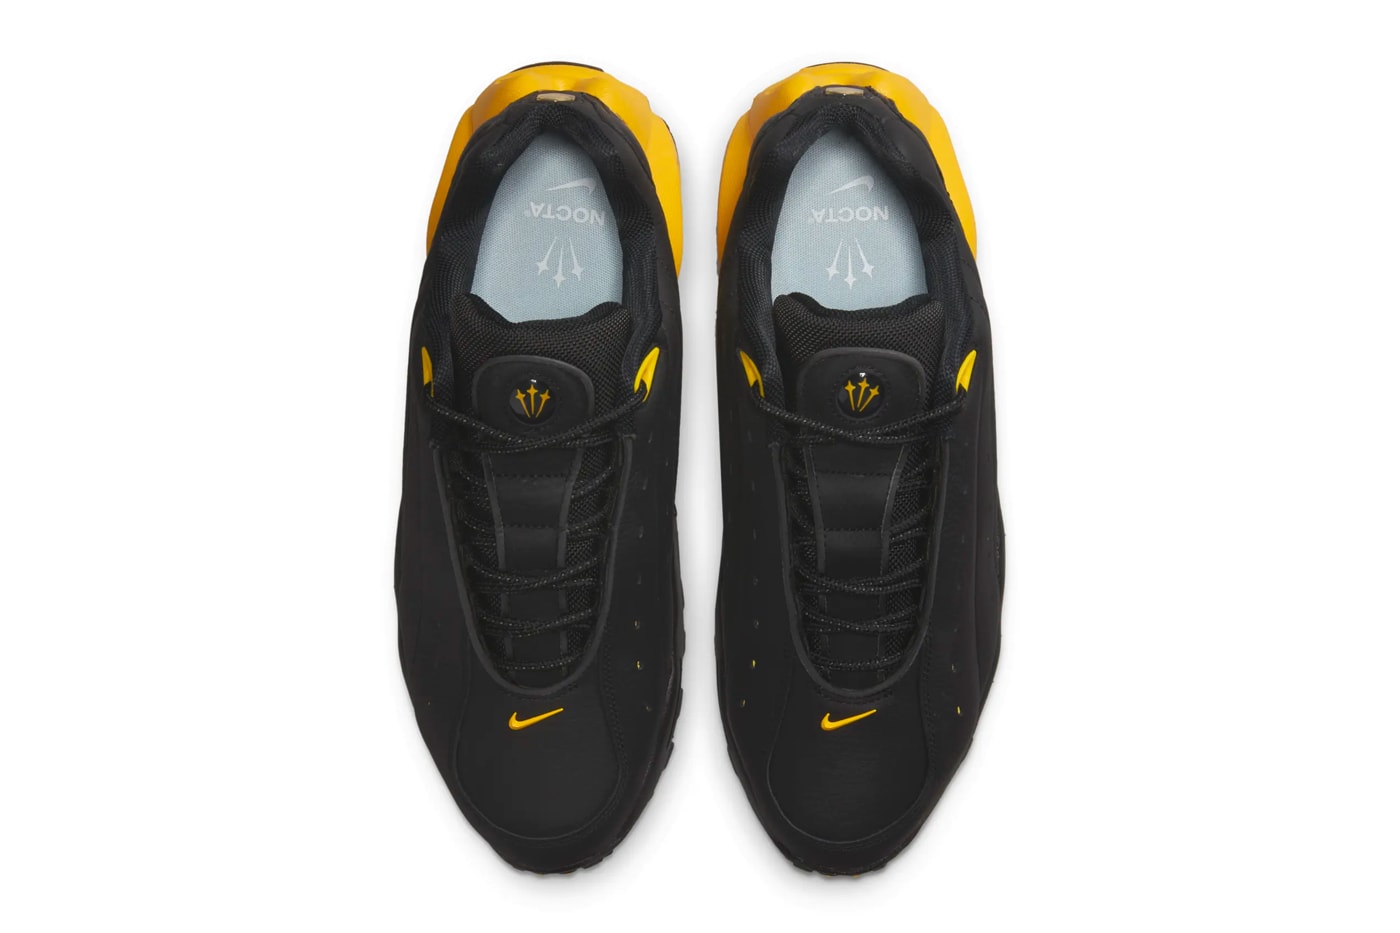 Drake's Nike Nocta Hot Step sneakers can finally be yours today